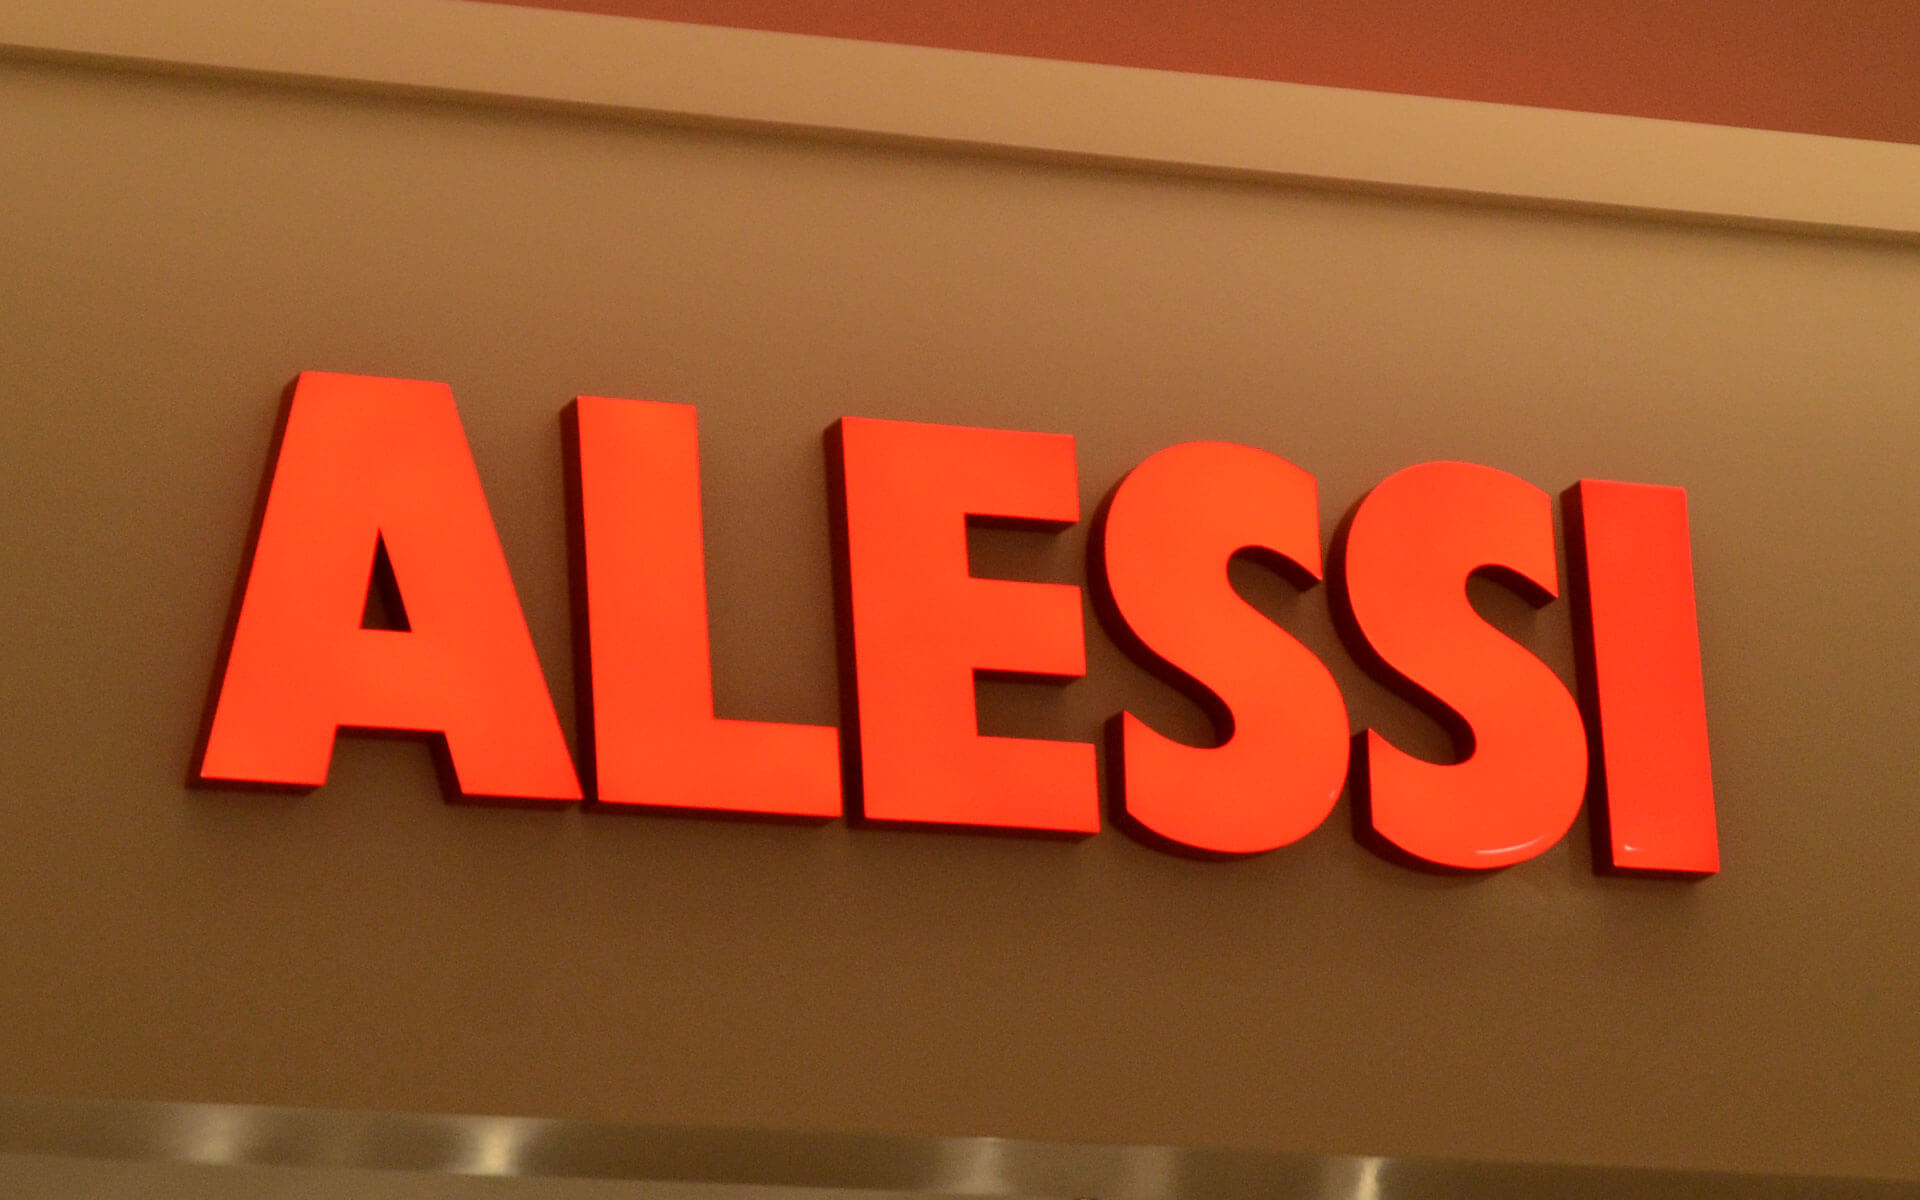 Trimless Face-lit Metal Channel Letters for Alessi